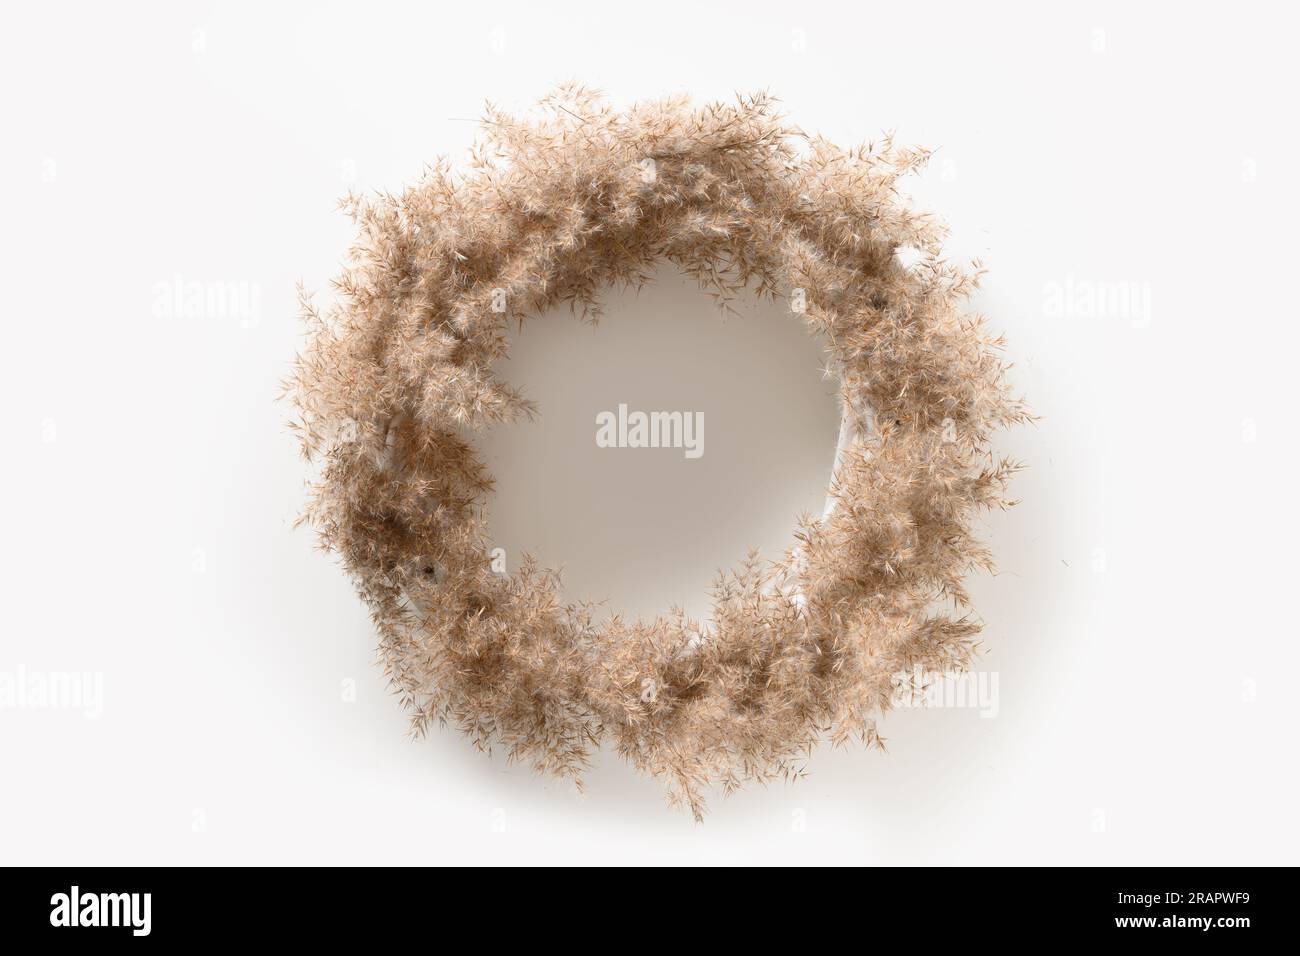 Thanksgiving wreath with dry natural materials isolated on white background. Top view. Copy space. Minimalism. Stock Photo